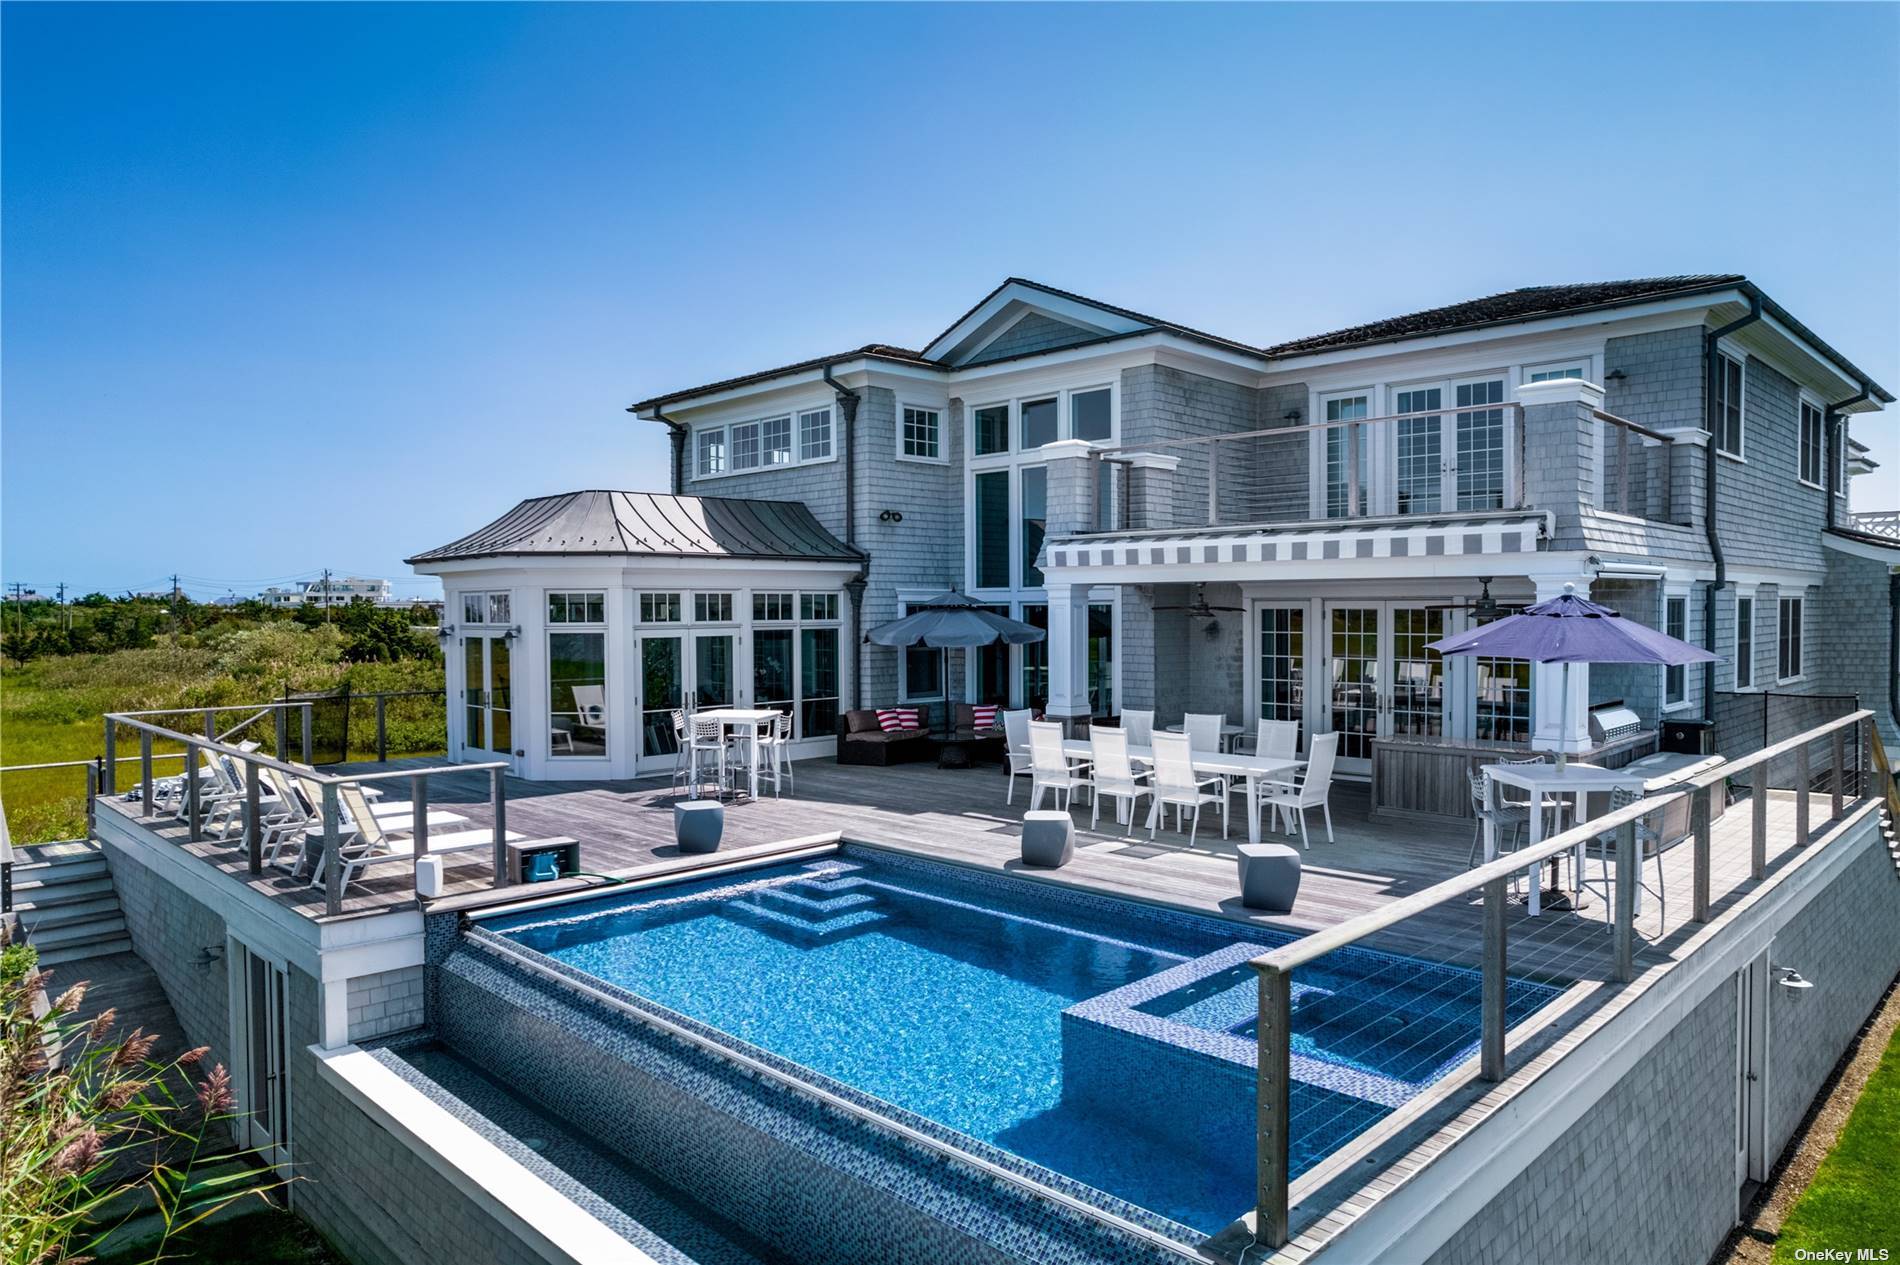 Waterfront living in the Hamptons doesn't get any better than this on 3.